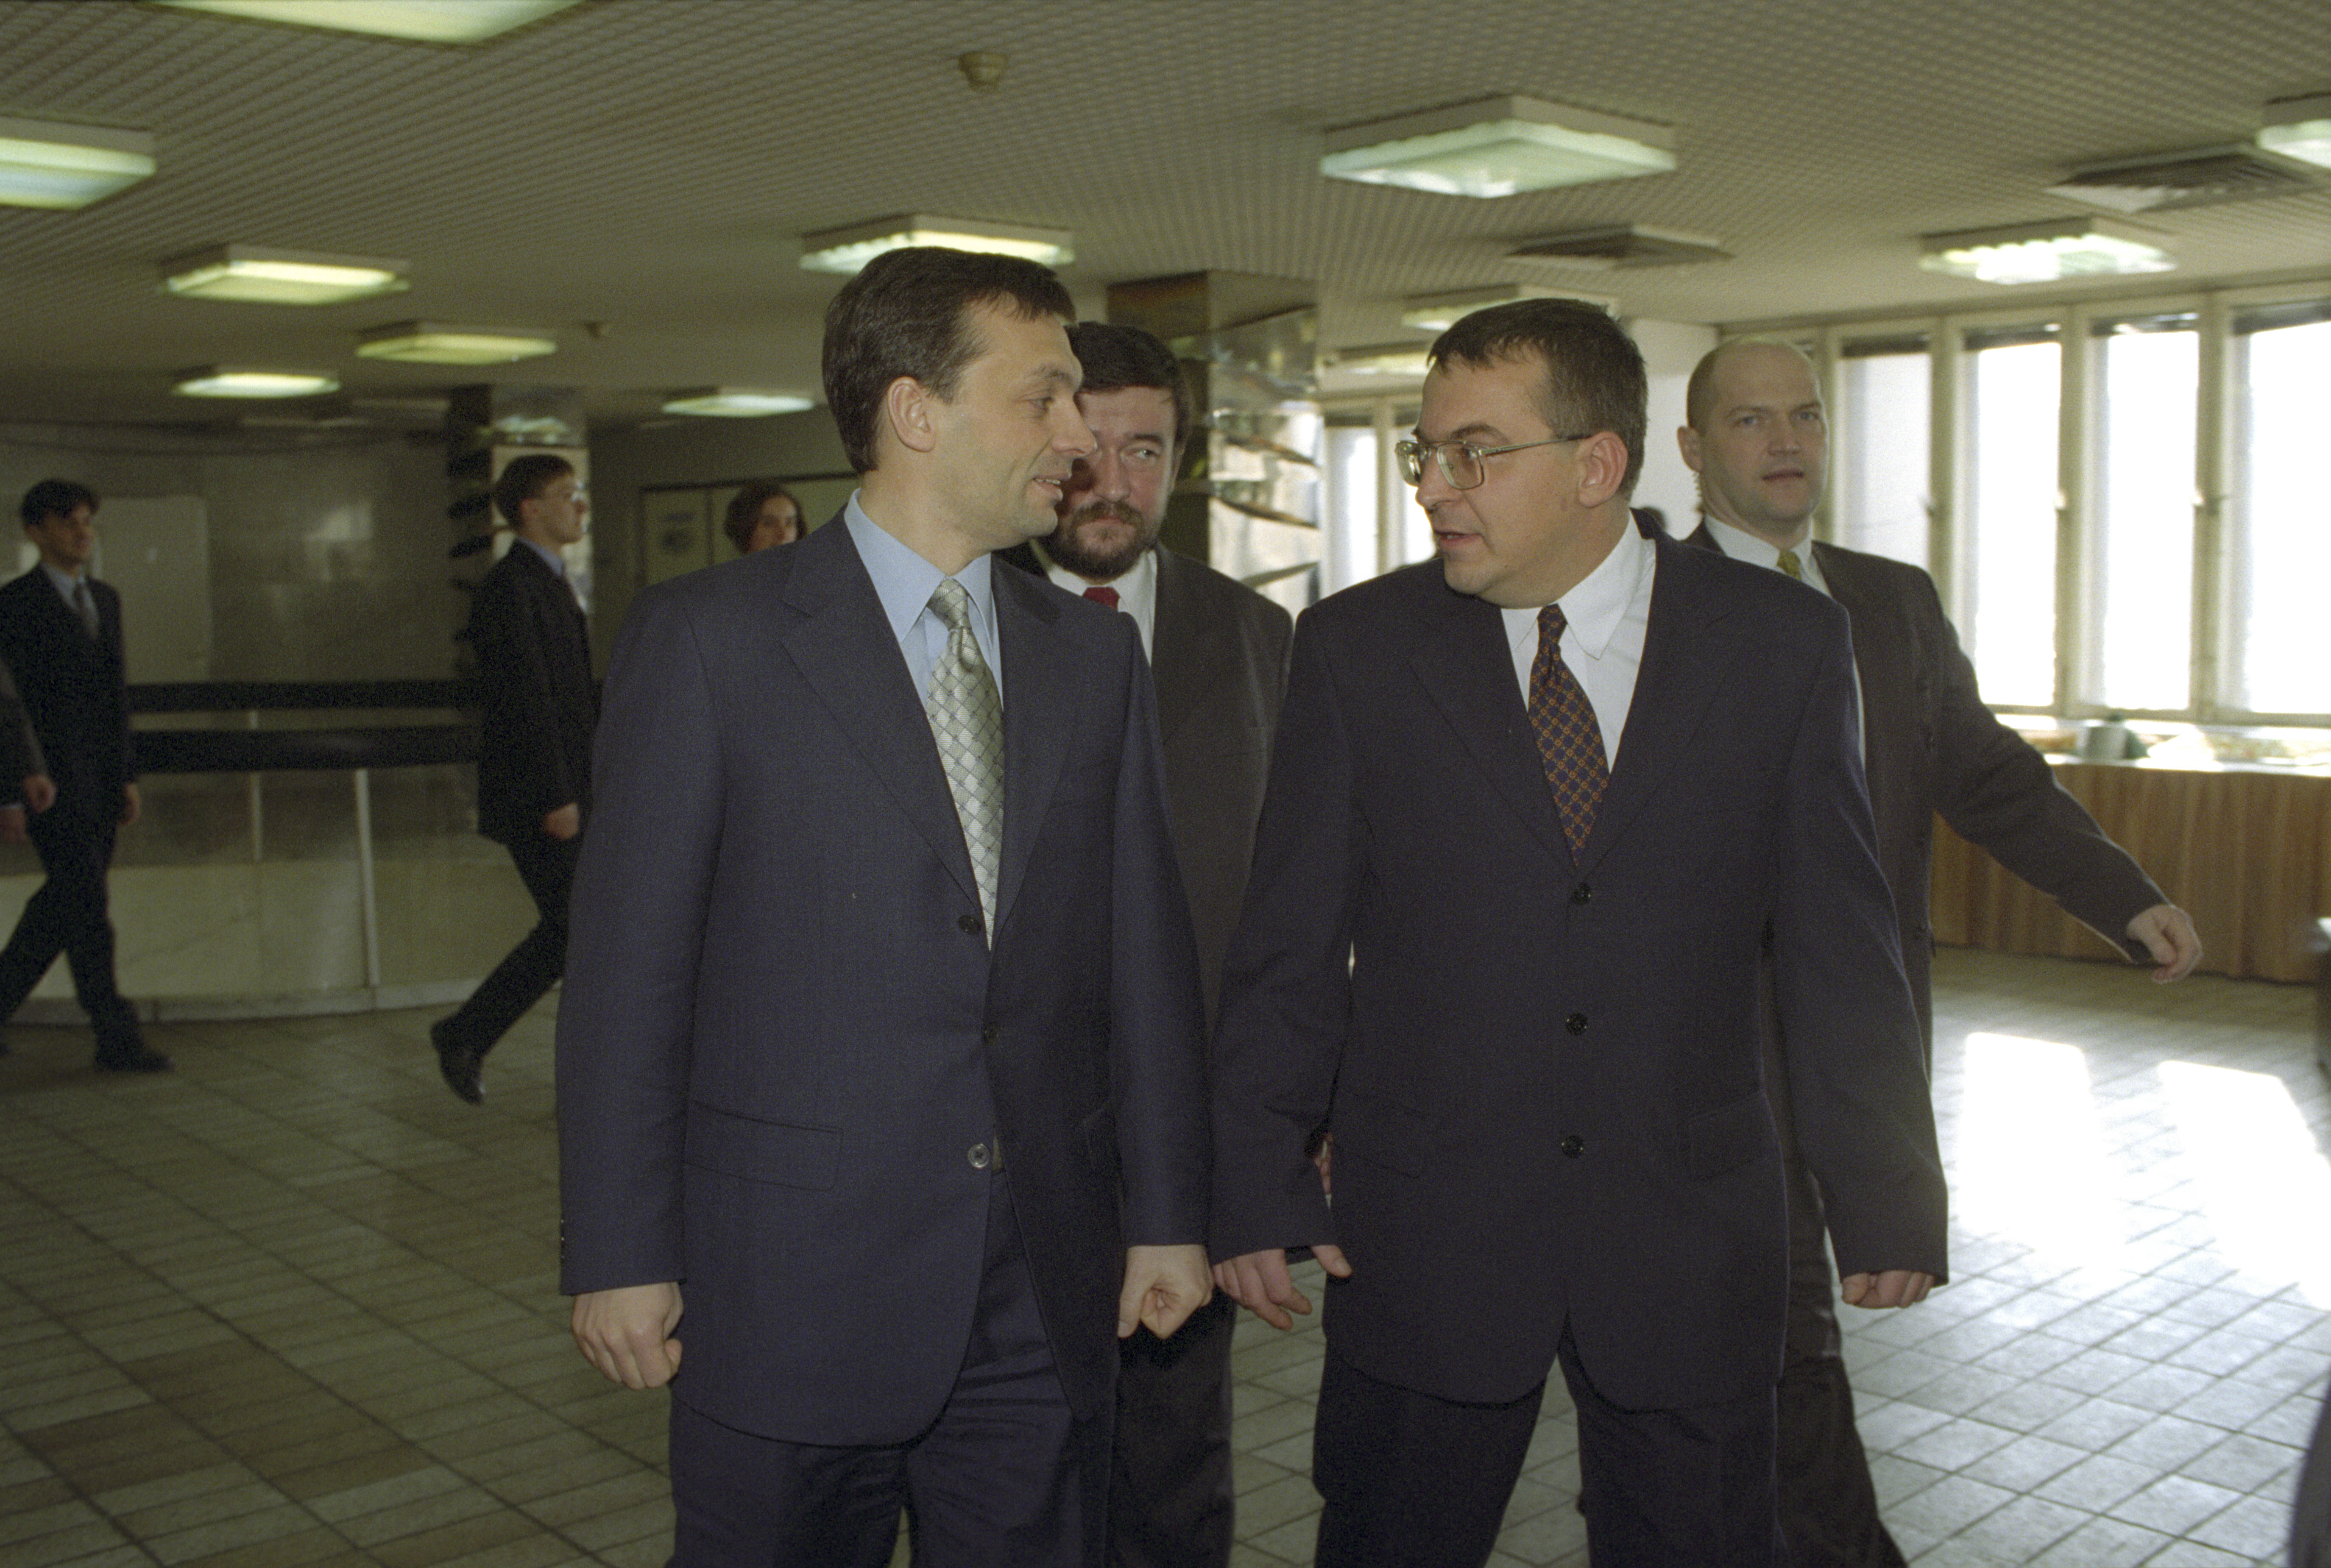 Prime Minister Viktor Orbán and Lajos Simicska, then President of the Tax and Financial Control Office in 1999, during the first Fidesz government